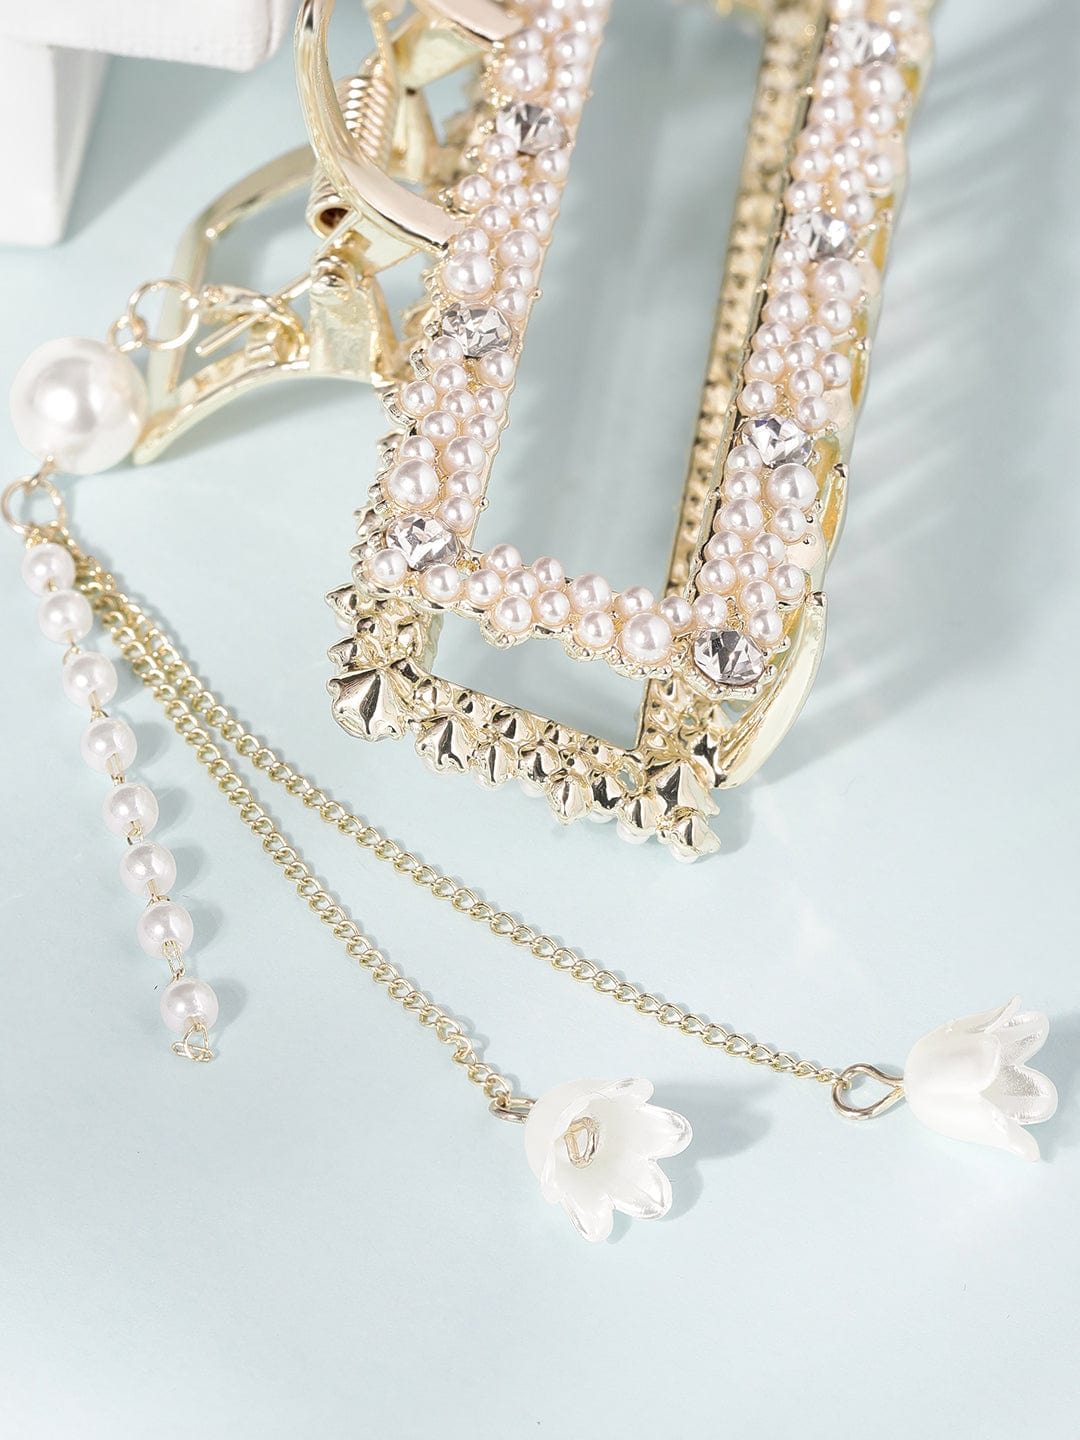 Rubans AD and Pearl Beaded Square-Shaped Hair Clip with Hangings Hair Accessories